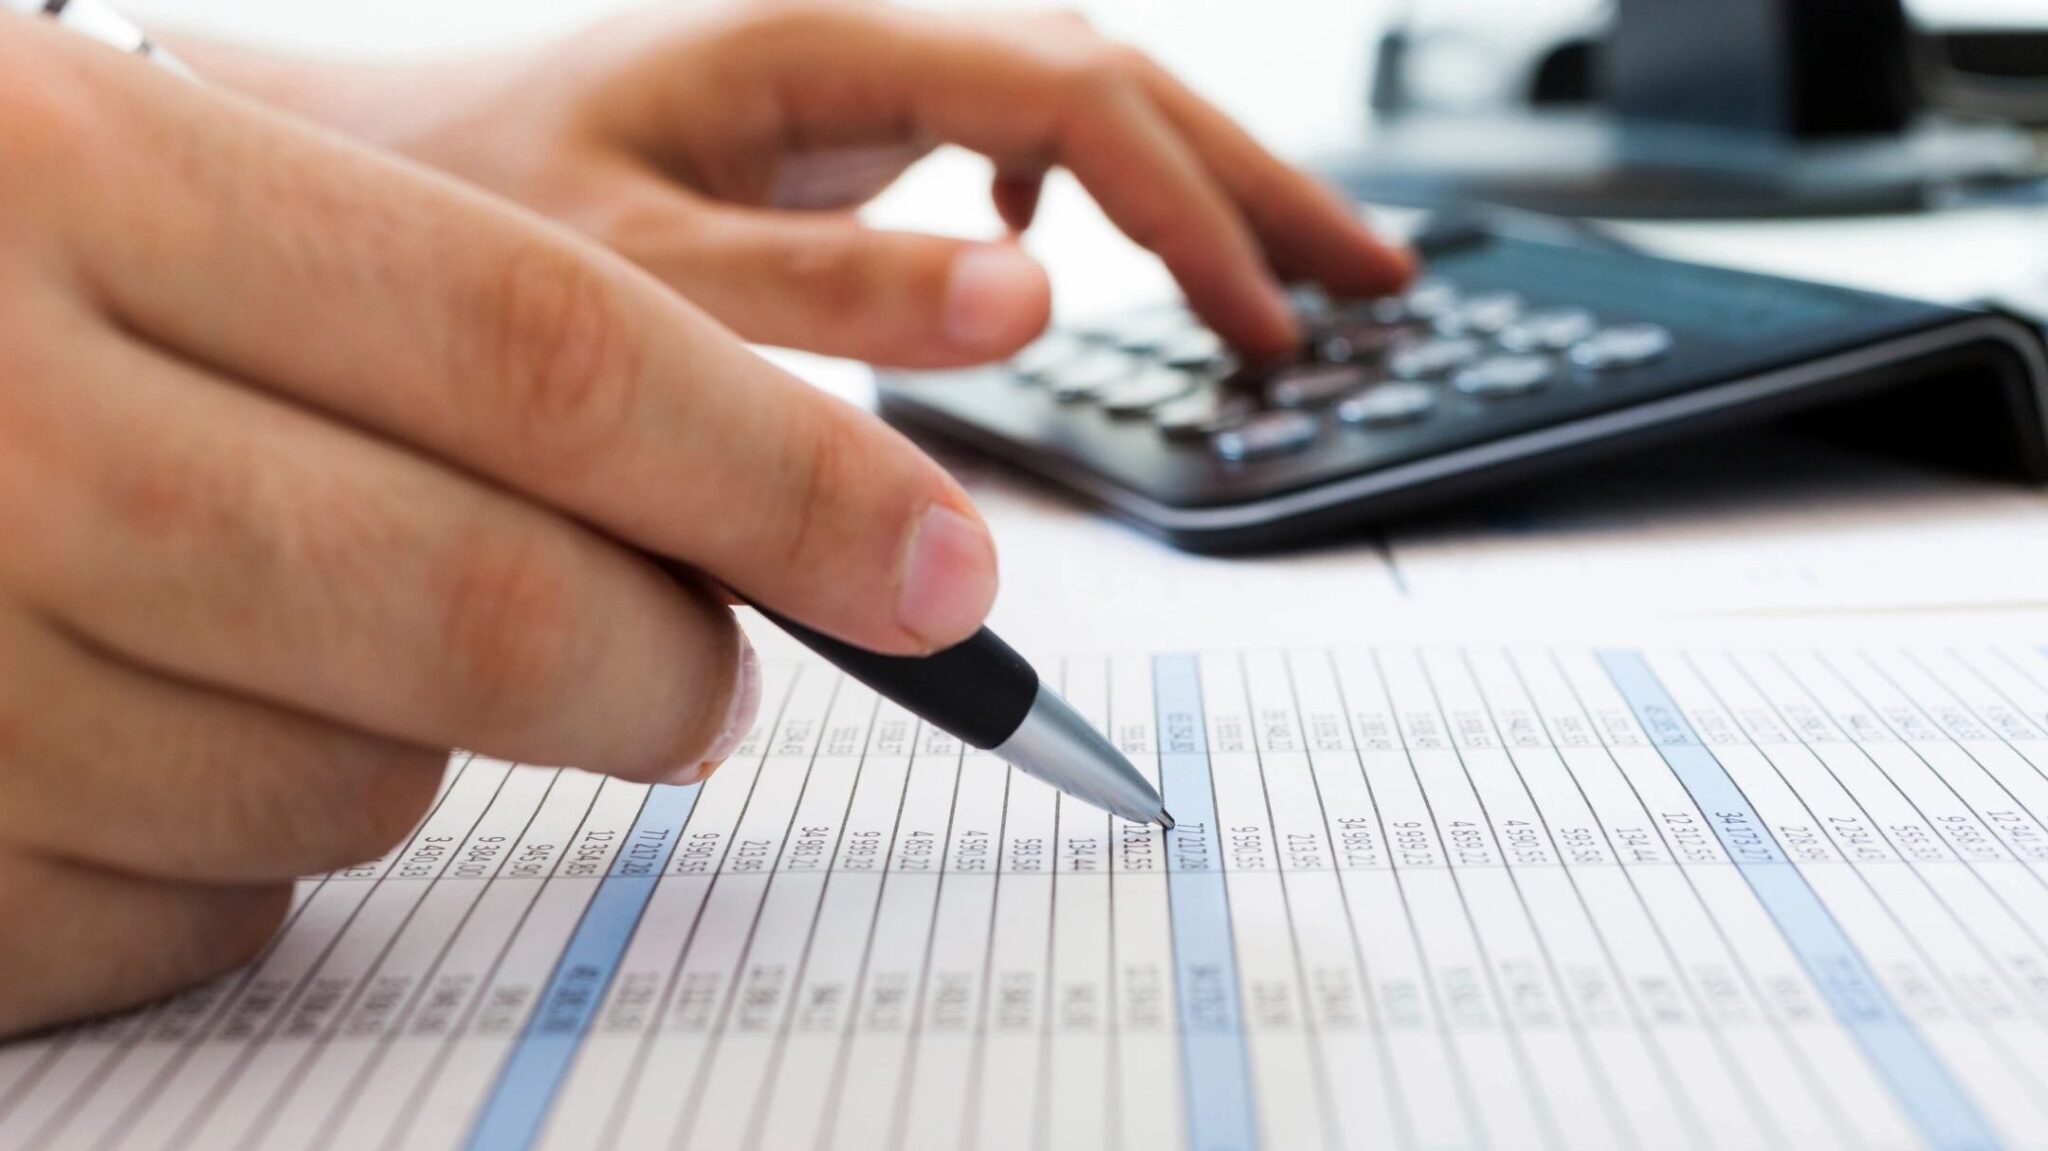 A person points to figures in a financial report at their desk as they key-in figures into a calculator with their left hand.